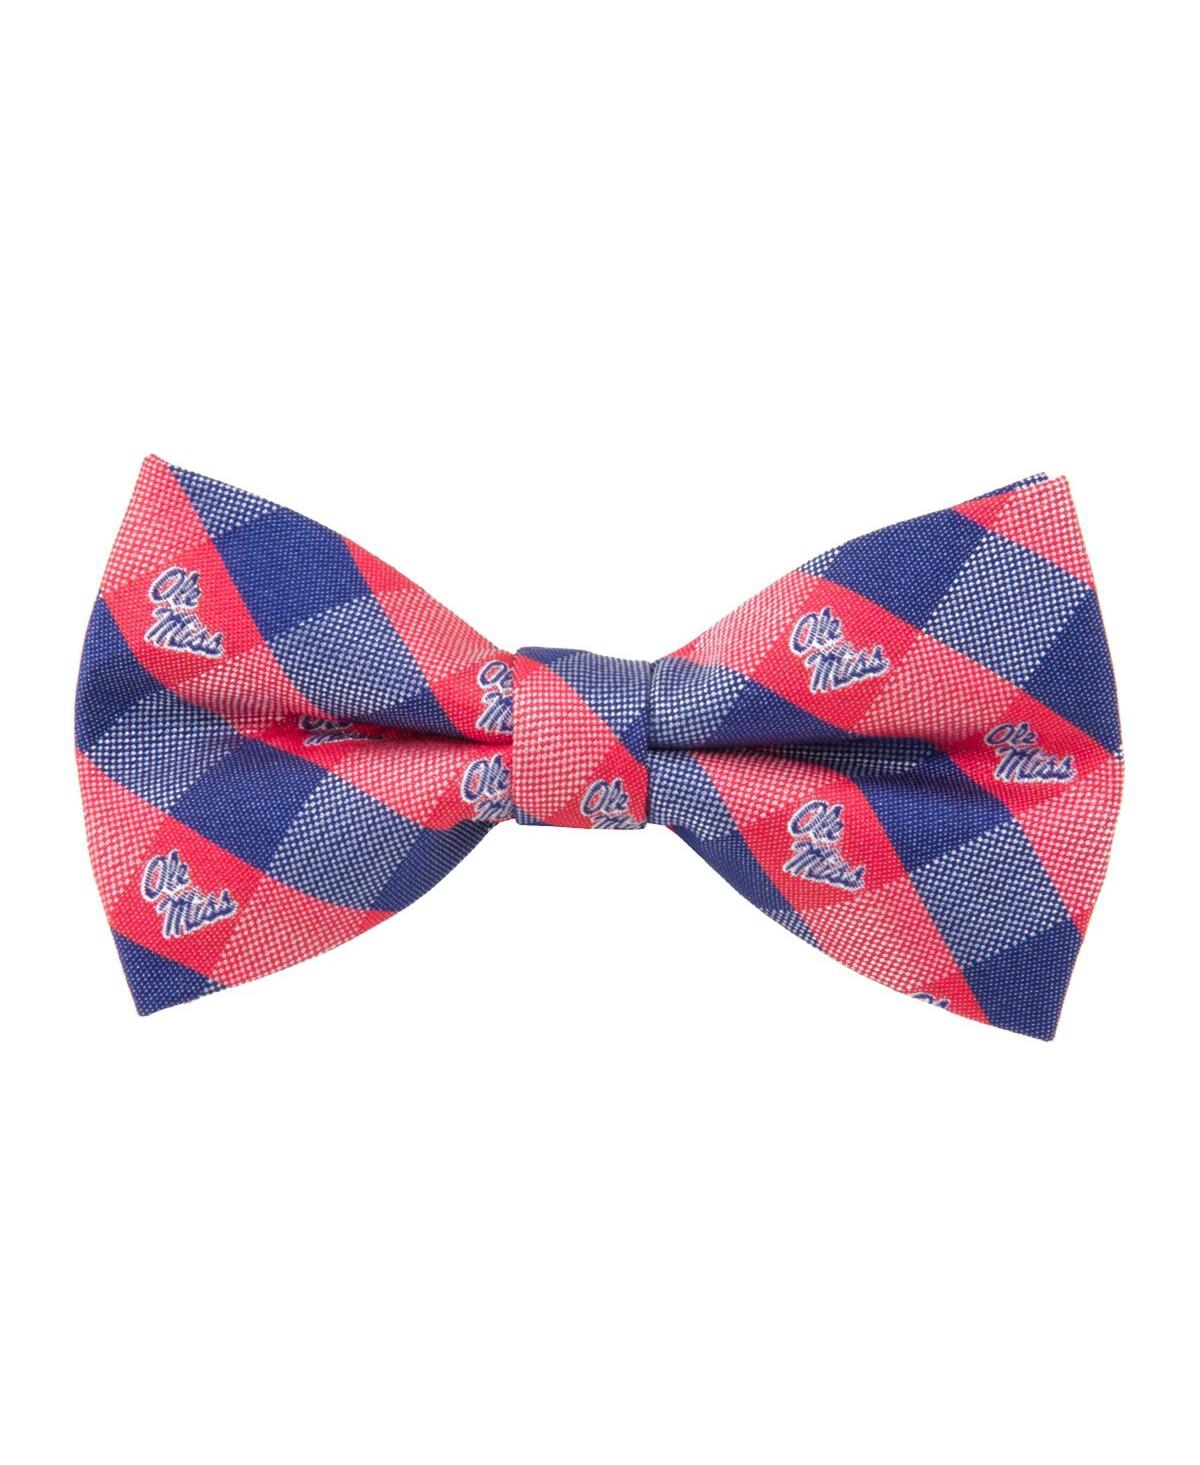 Men's Navy Ole Miss Rebels Check Bow Tie - Navy